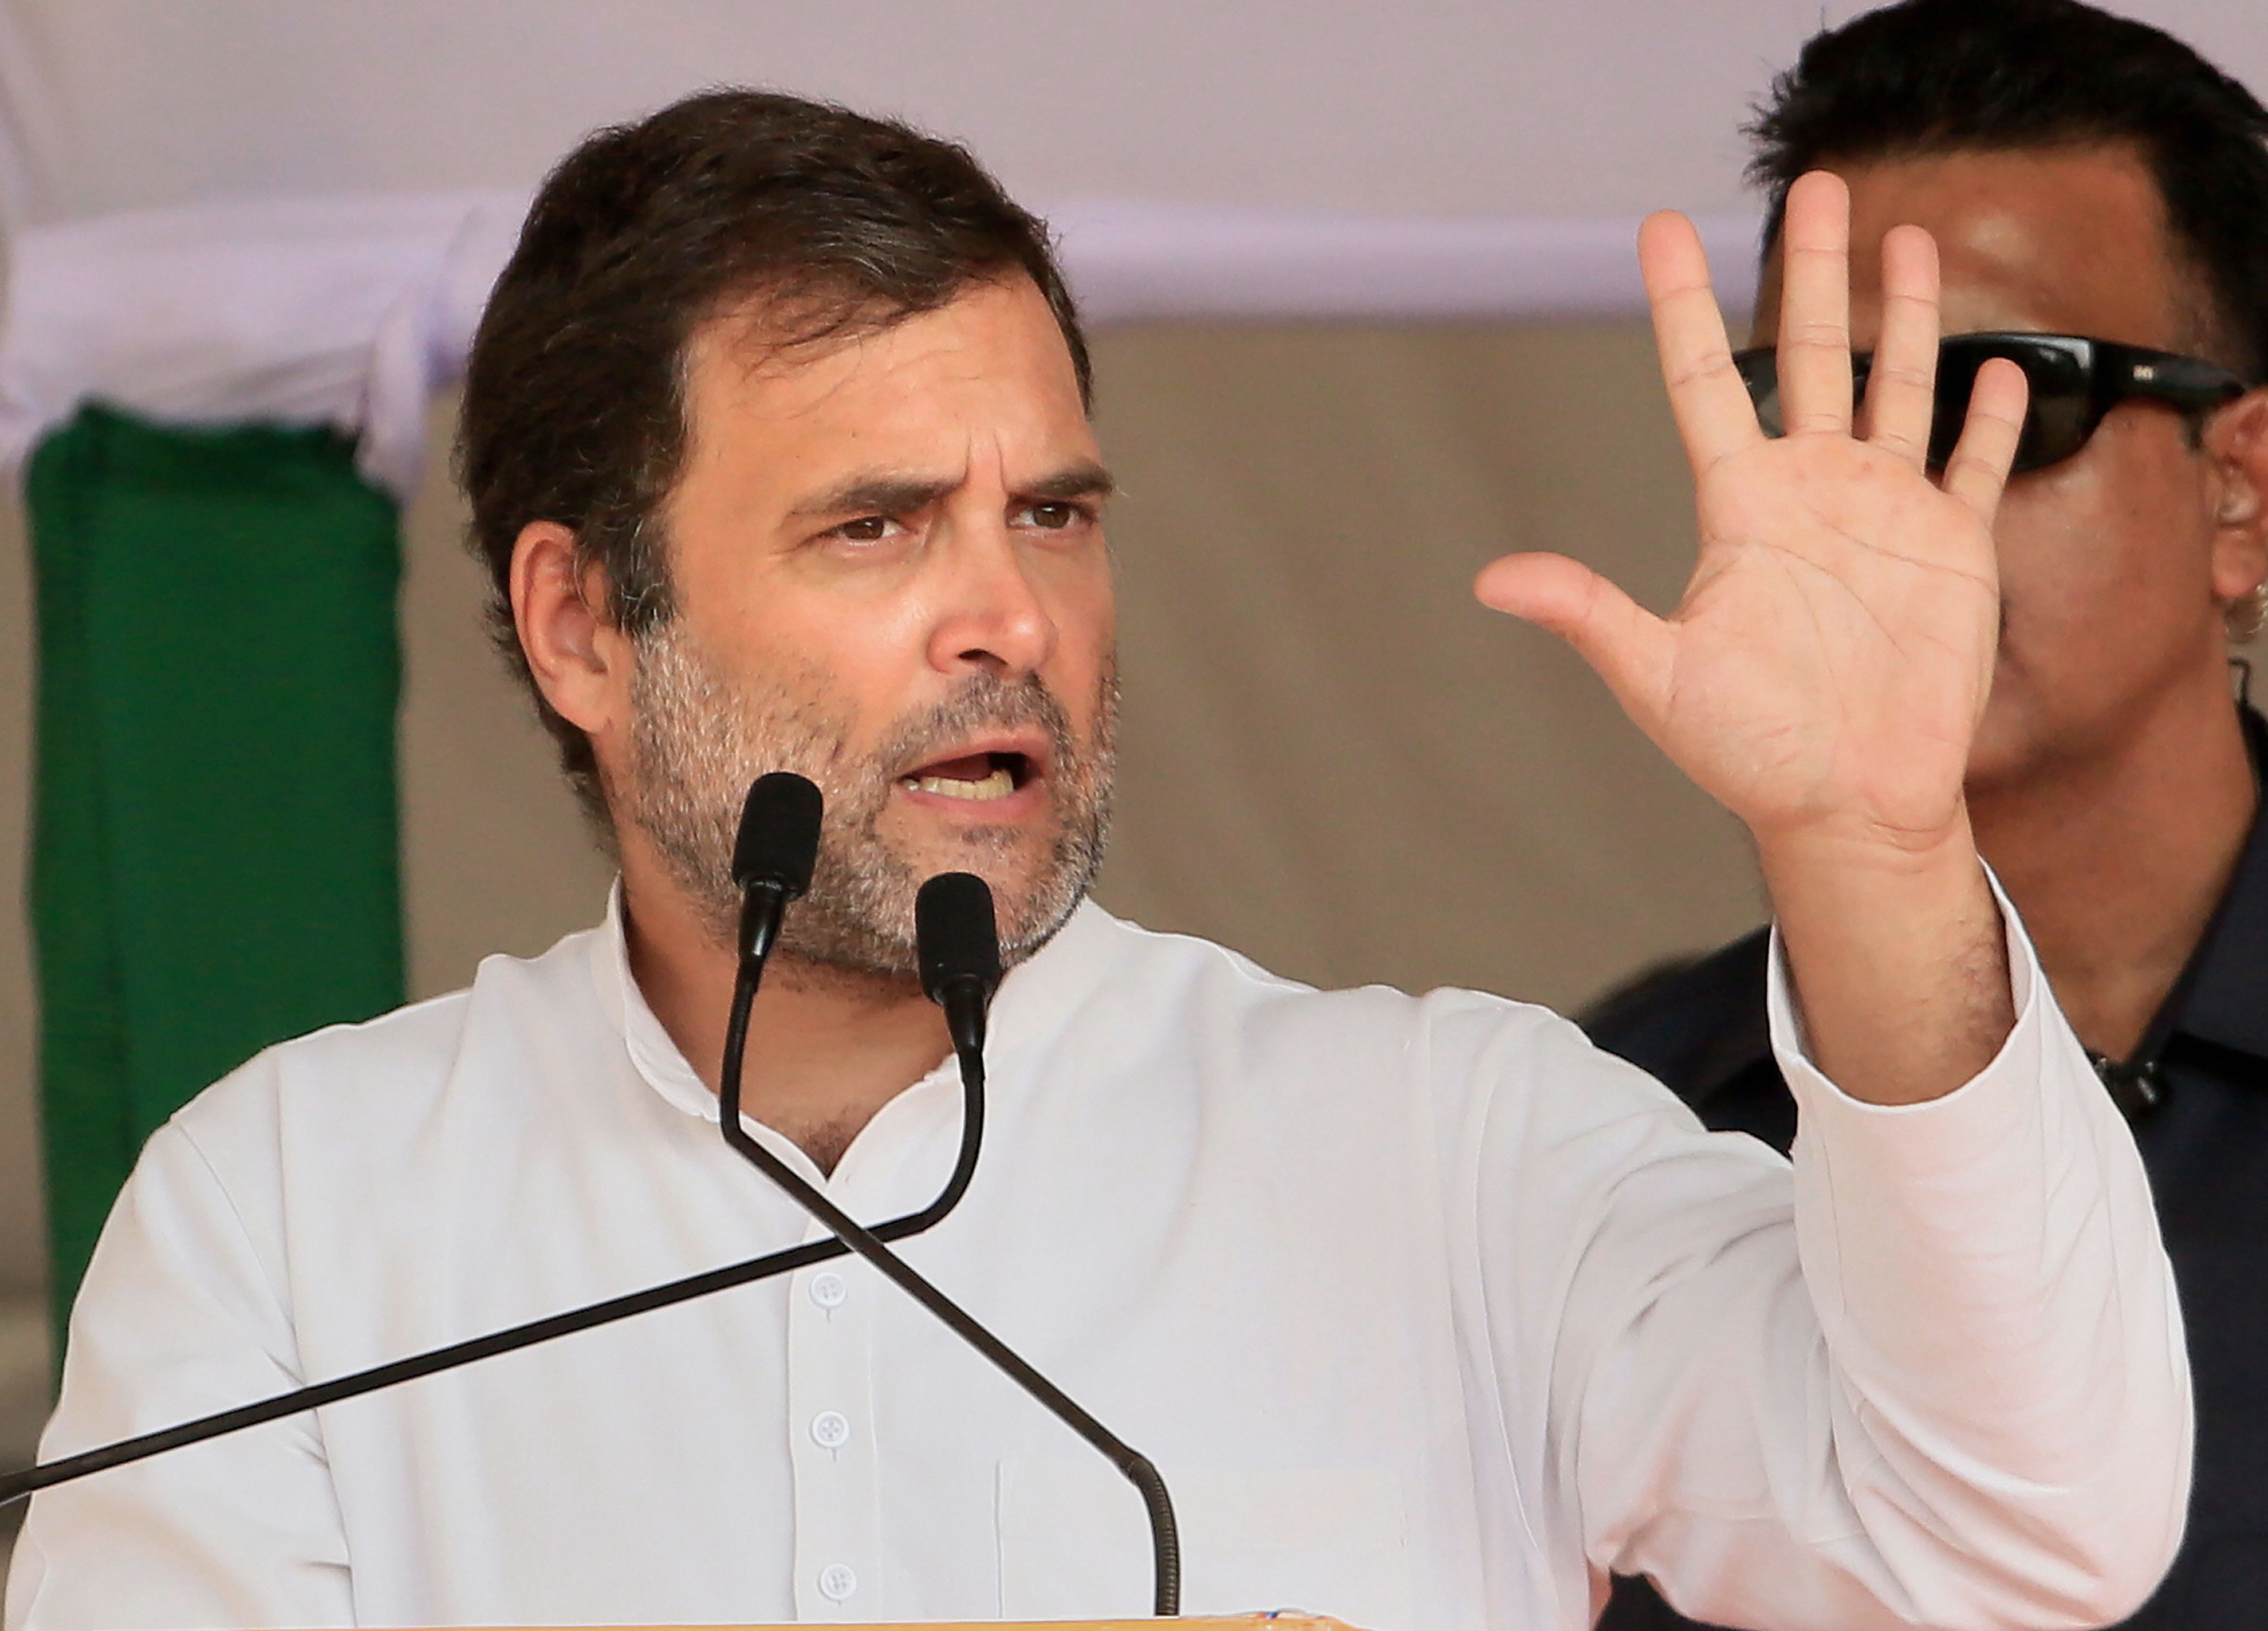 Those who fight for truth cannot be intimidated: Rahul on probe into Gandhi trusts